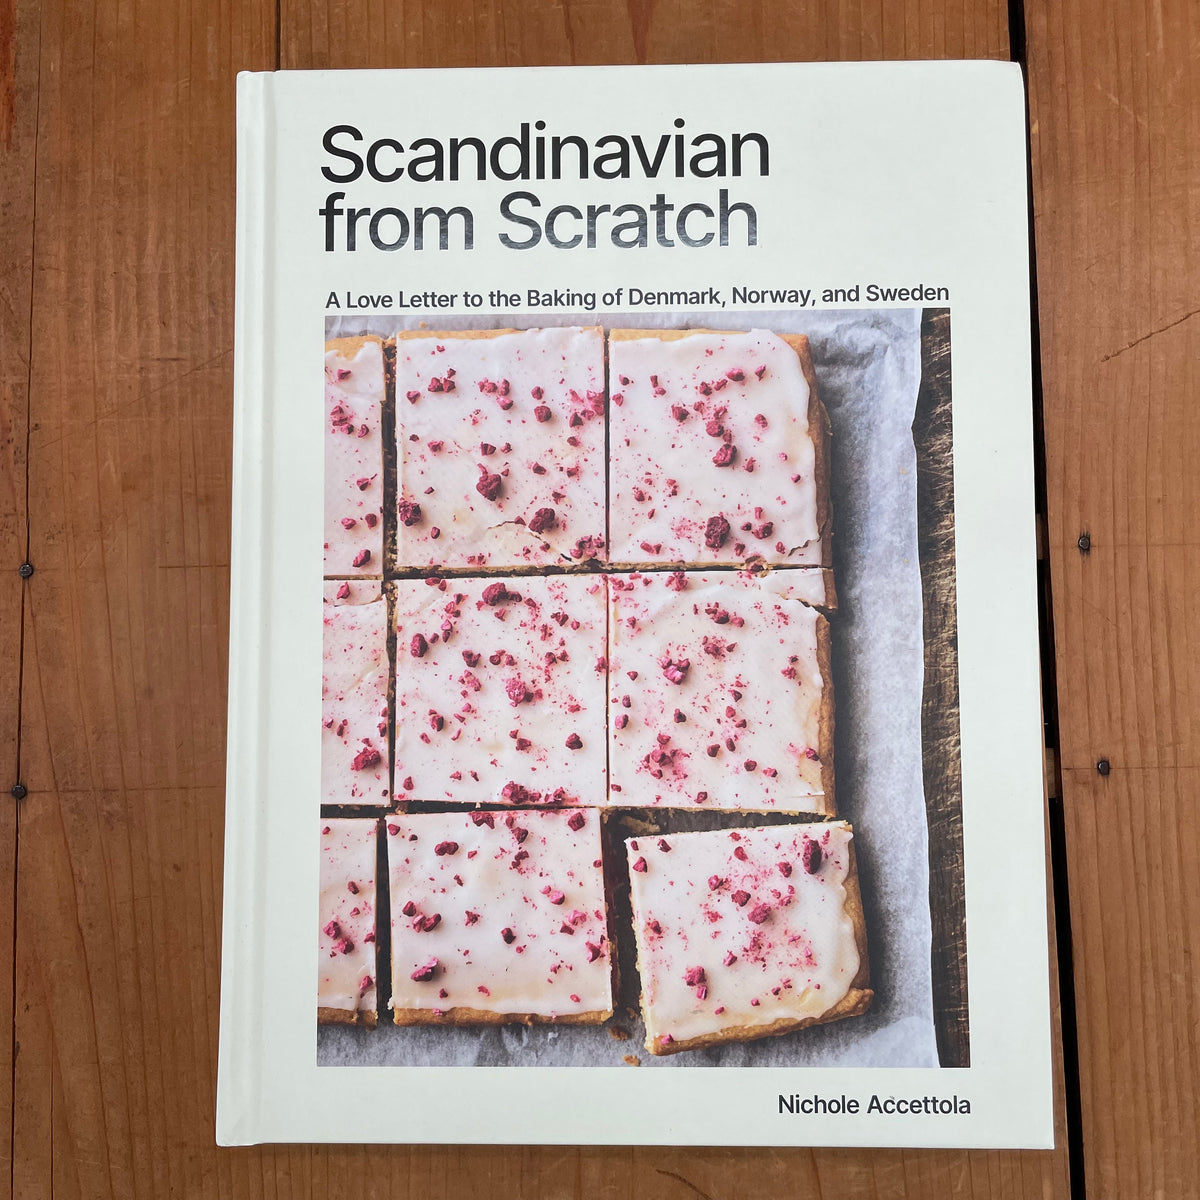 Scandinavian from Scratch: A Love Letter to the Baking of Denmark, Norway, and Sweden [A Baking Book] Nichole Accettola